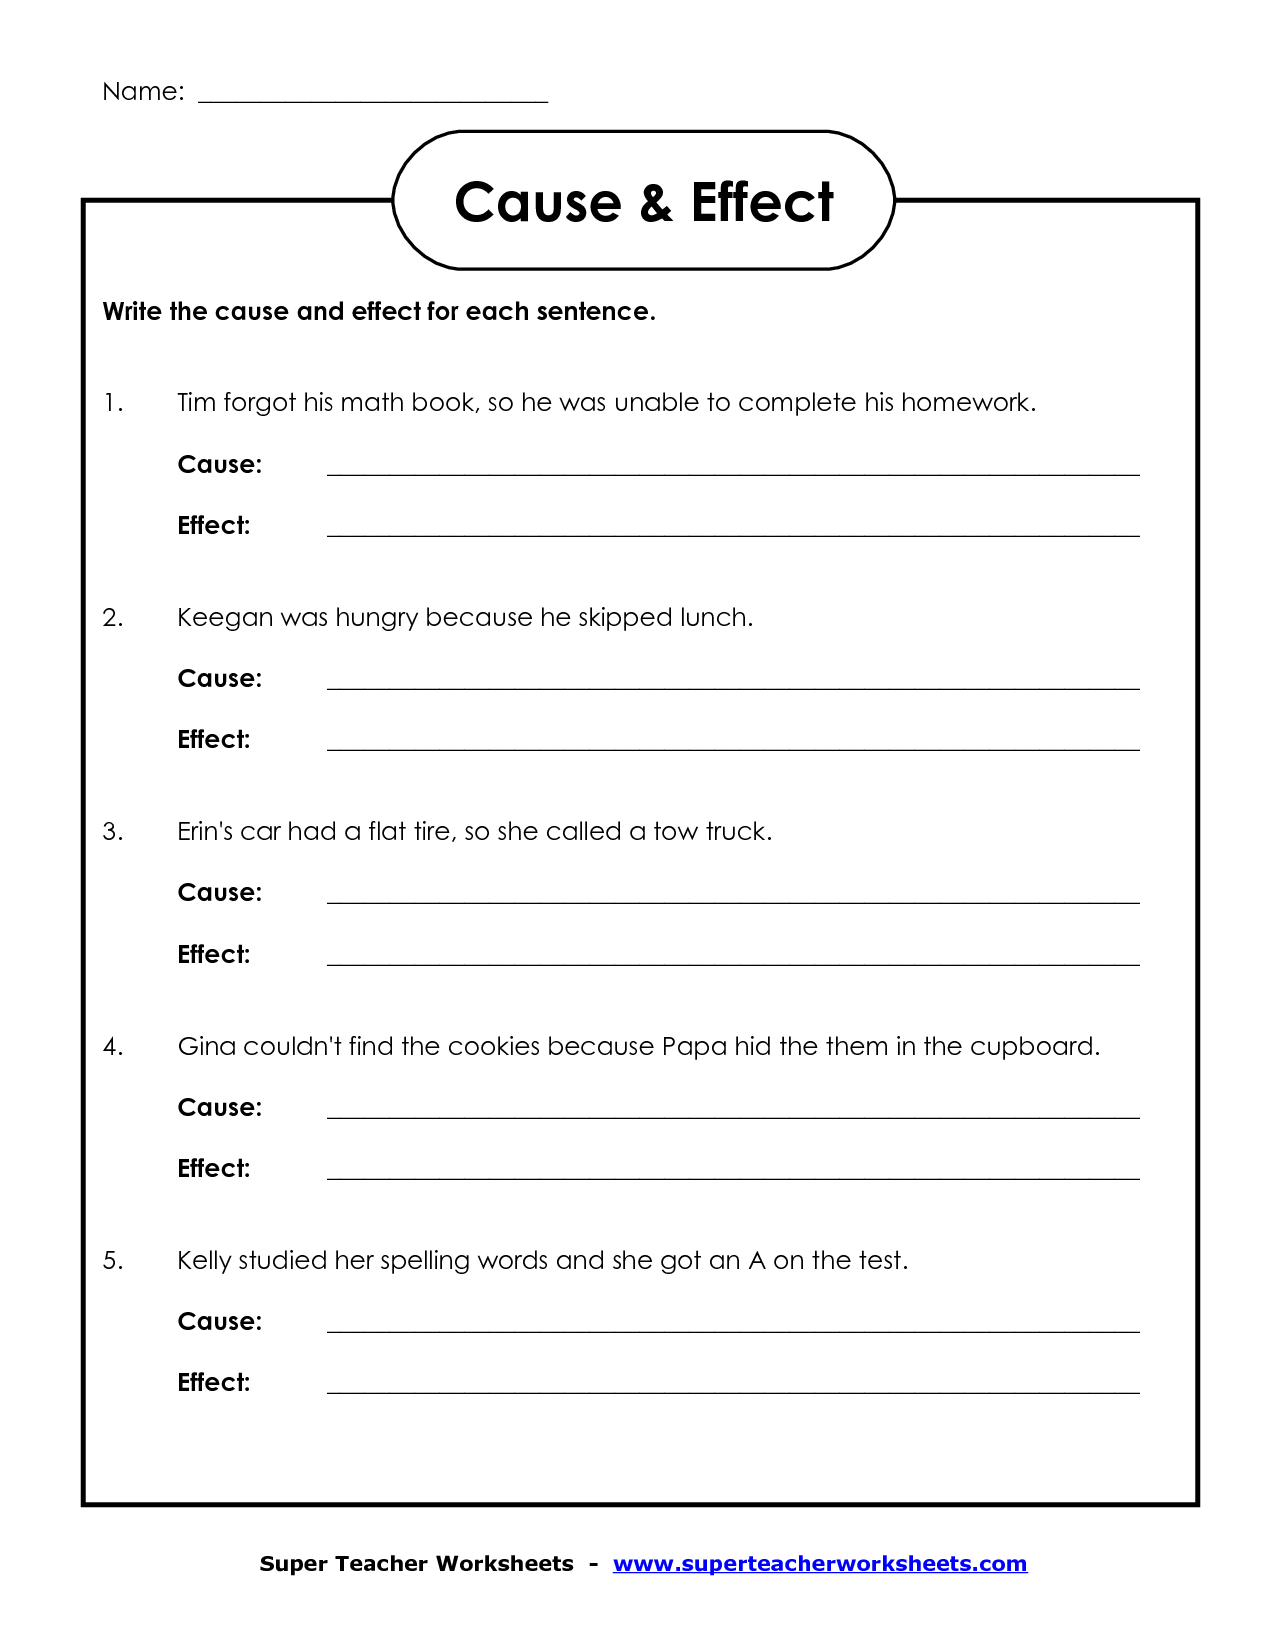 Cause and Effect Worksheets 2nd Grade Image